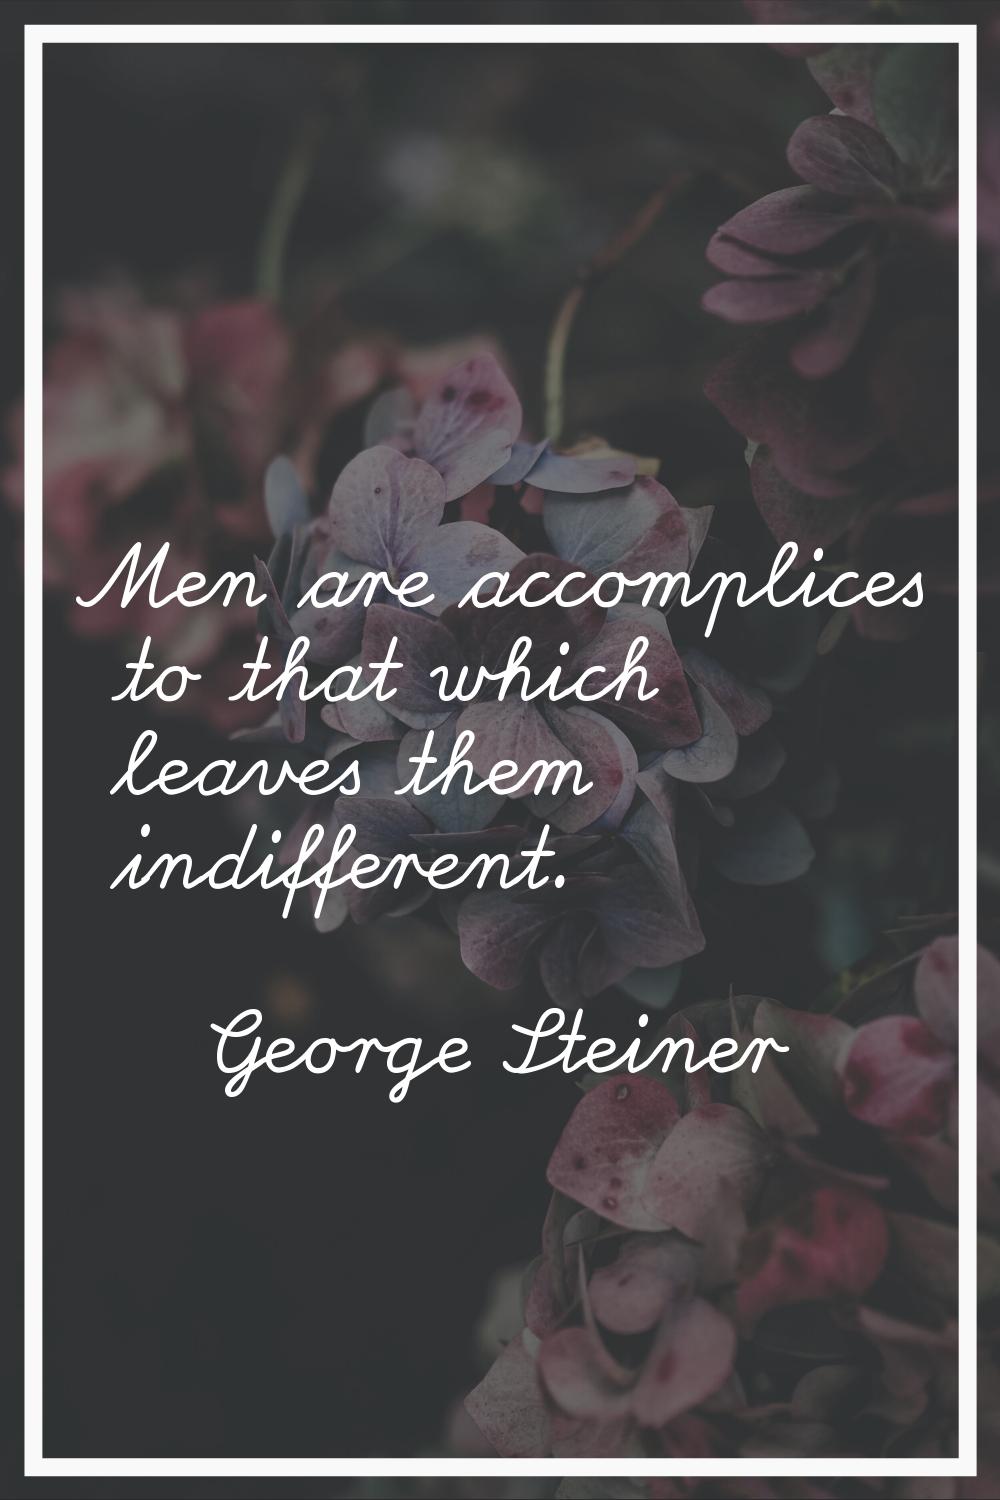 Men are accomplices to that which leaves them indifferent.